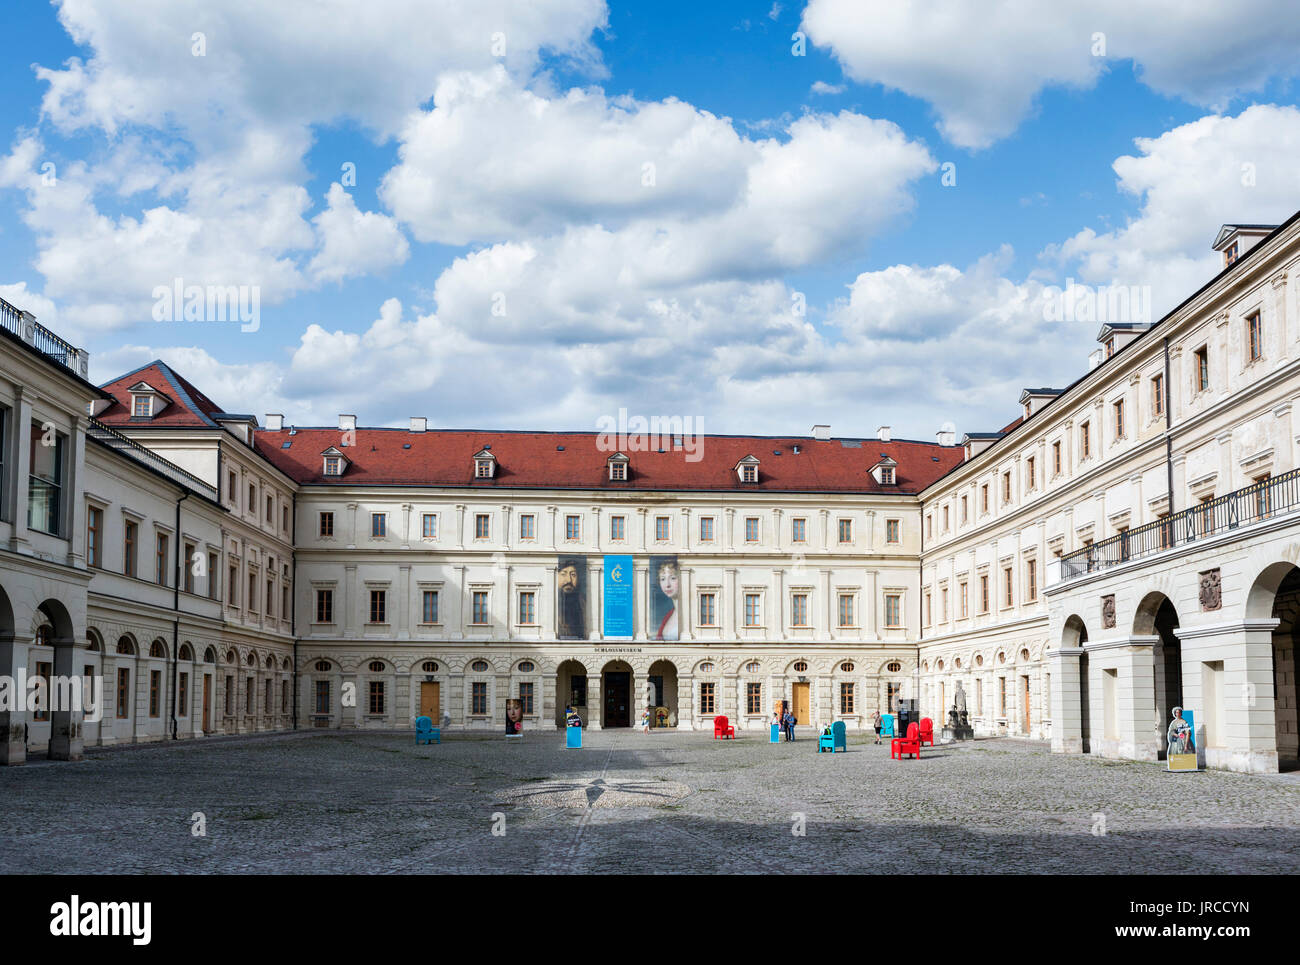 Courtyard of the Stadtschloss (Weimar Castle) housing the Neues Museum, Weimar, Thuringia, Germany Stock Photo